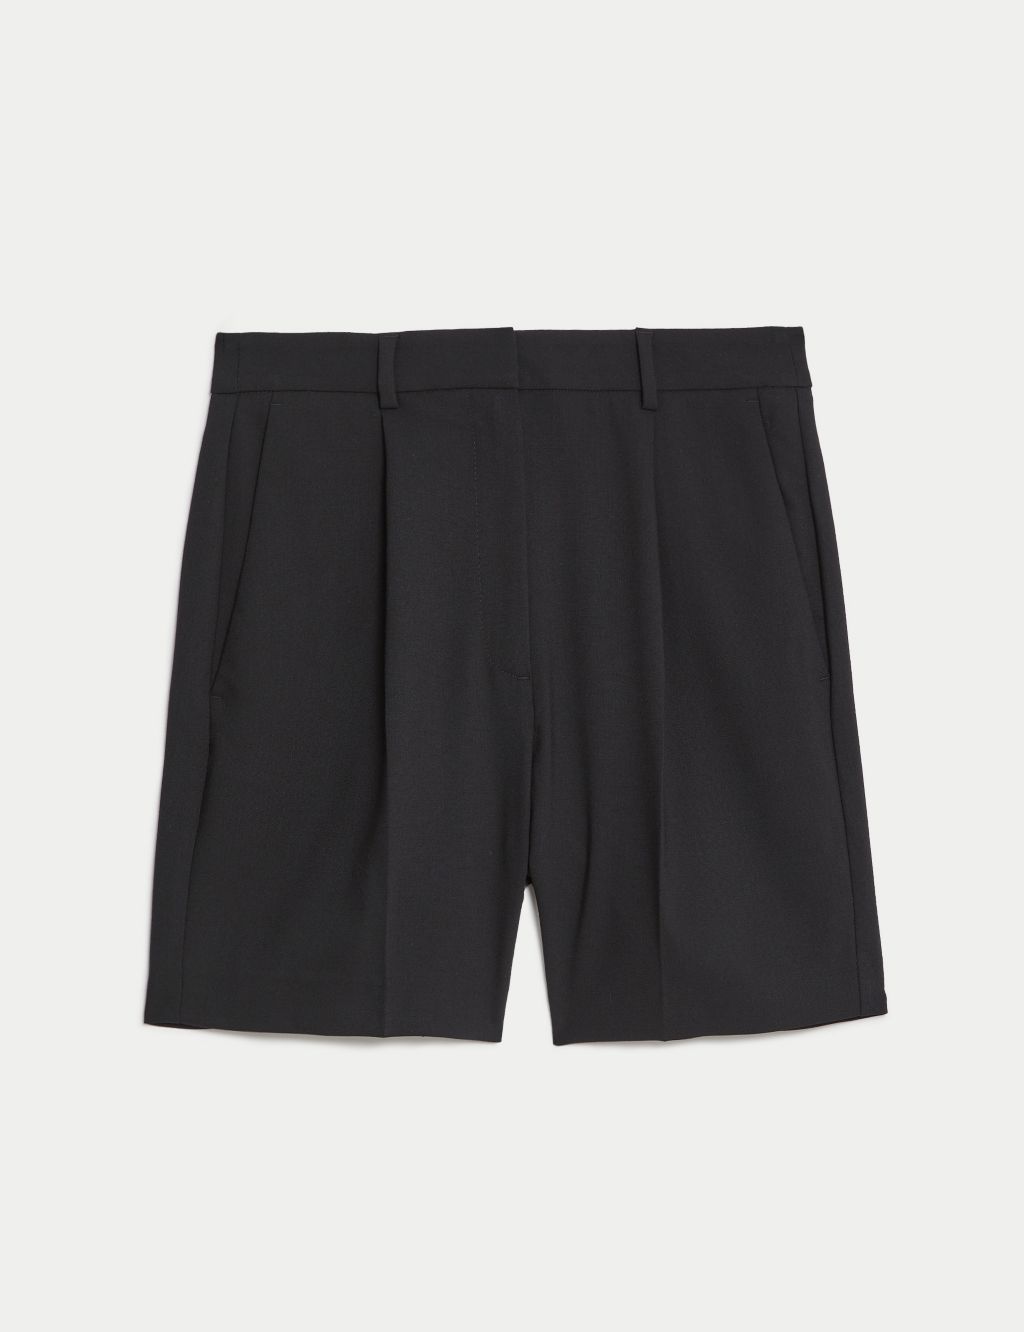 High Waisted Pleat Front Shorts image 2